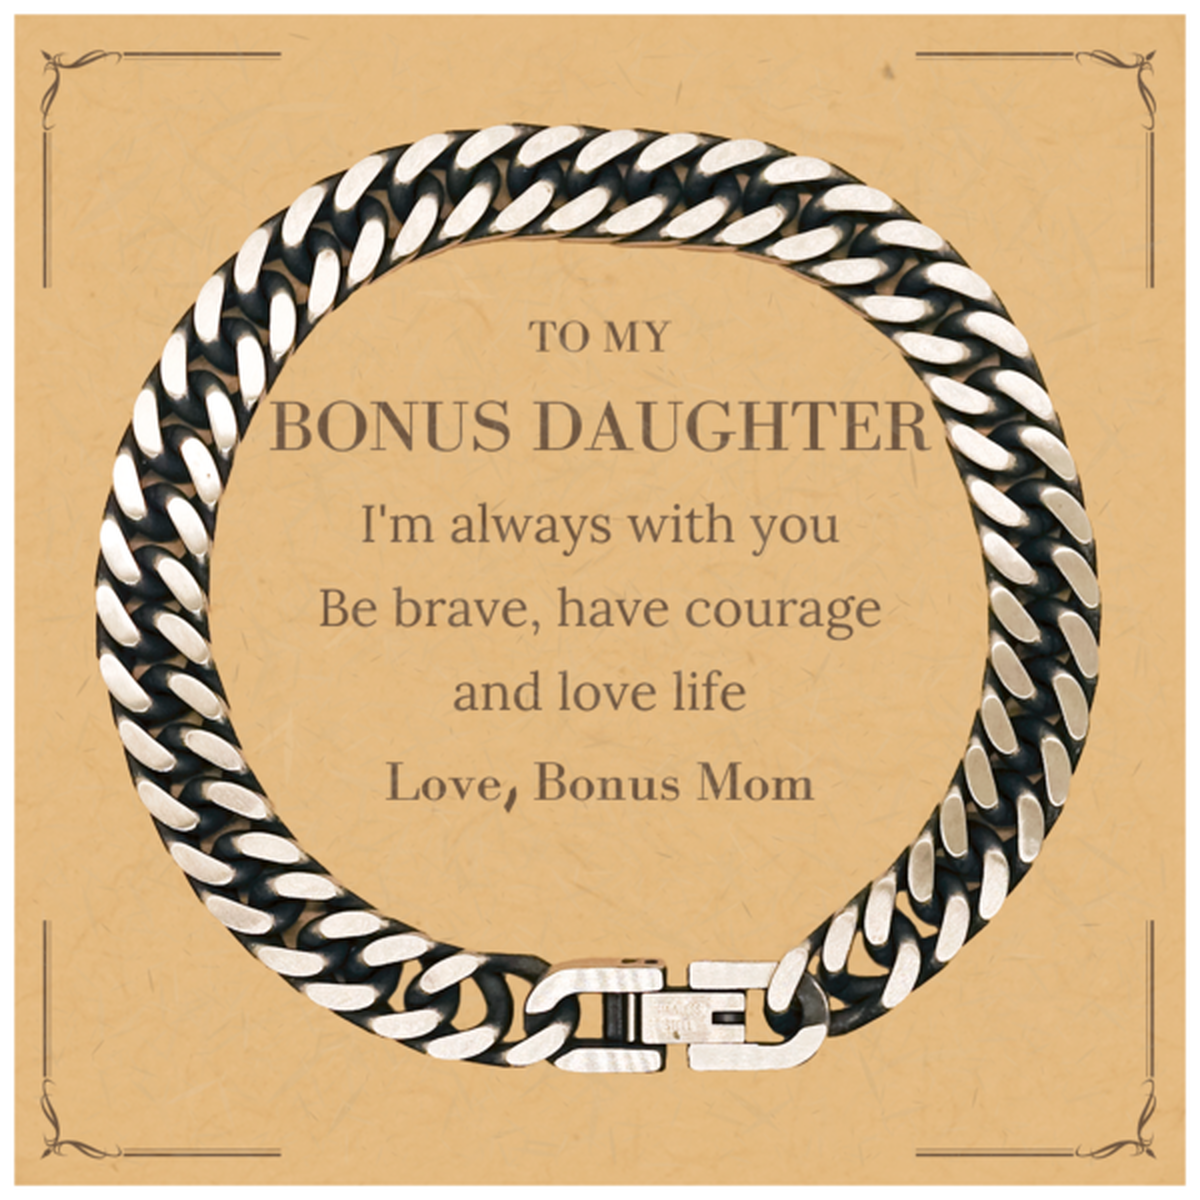 To My Bonus Daughter Gifts from Bonus Mom, Unique Cuban Link Chain Bracelet Inspirational Christmas Birthday Graduation Gifts for Bonus Daughter I'm always with you. Be brave, have courage and love life. Love, Bonus Mom